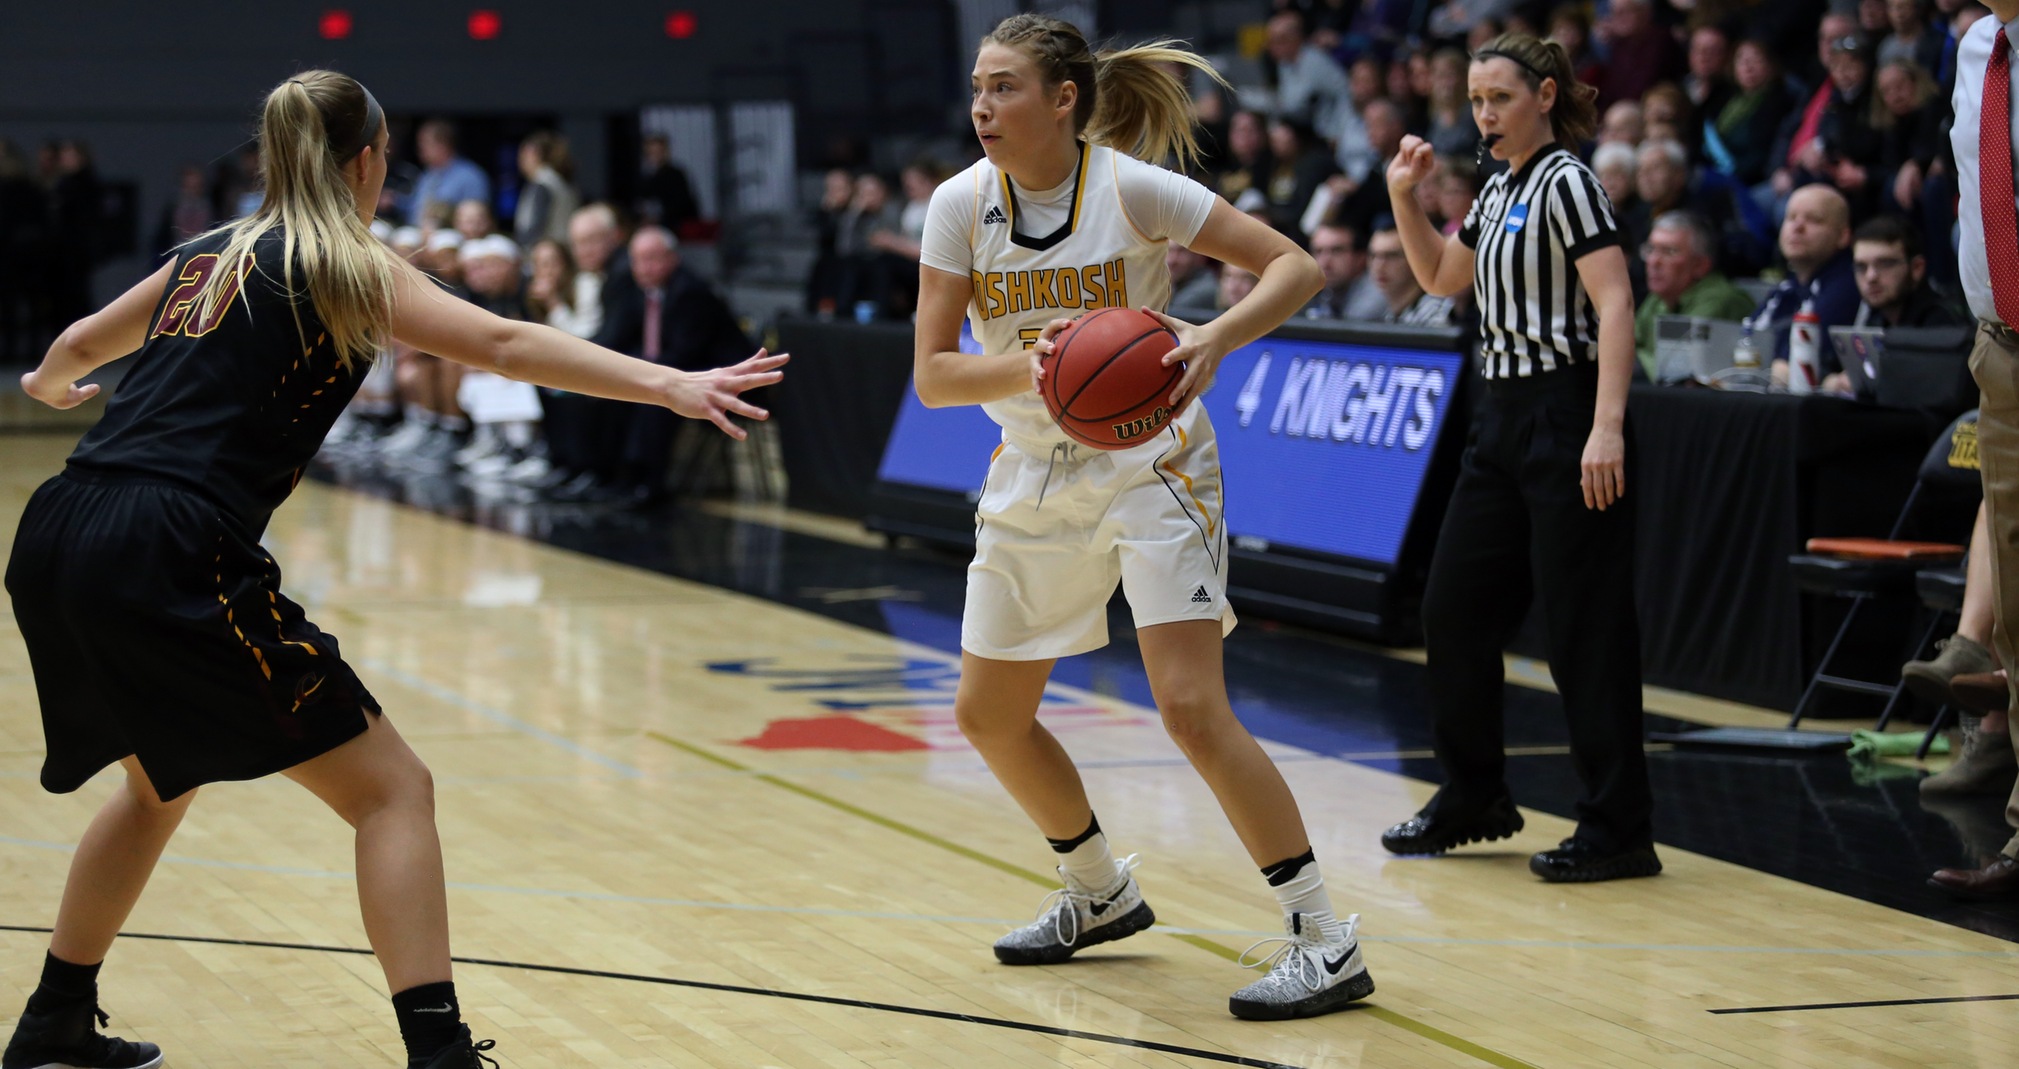 Madeline Staples scored 11 points, including a game-high five free throws, and grabbed four rebounds against the Blugolds.